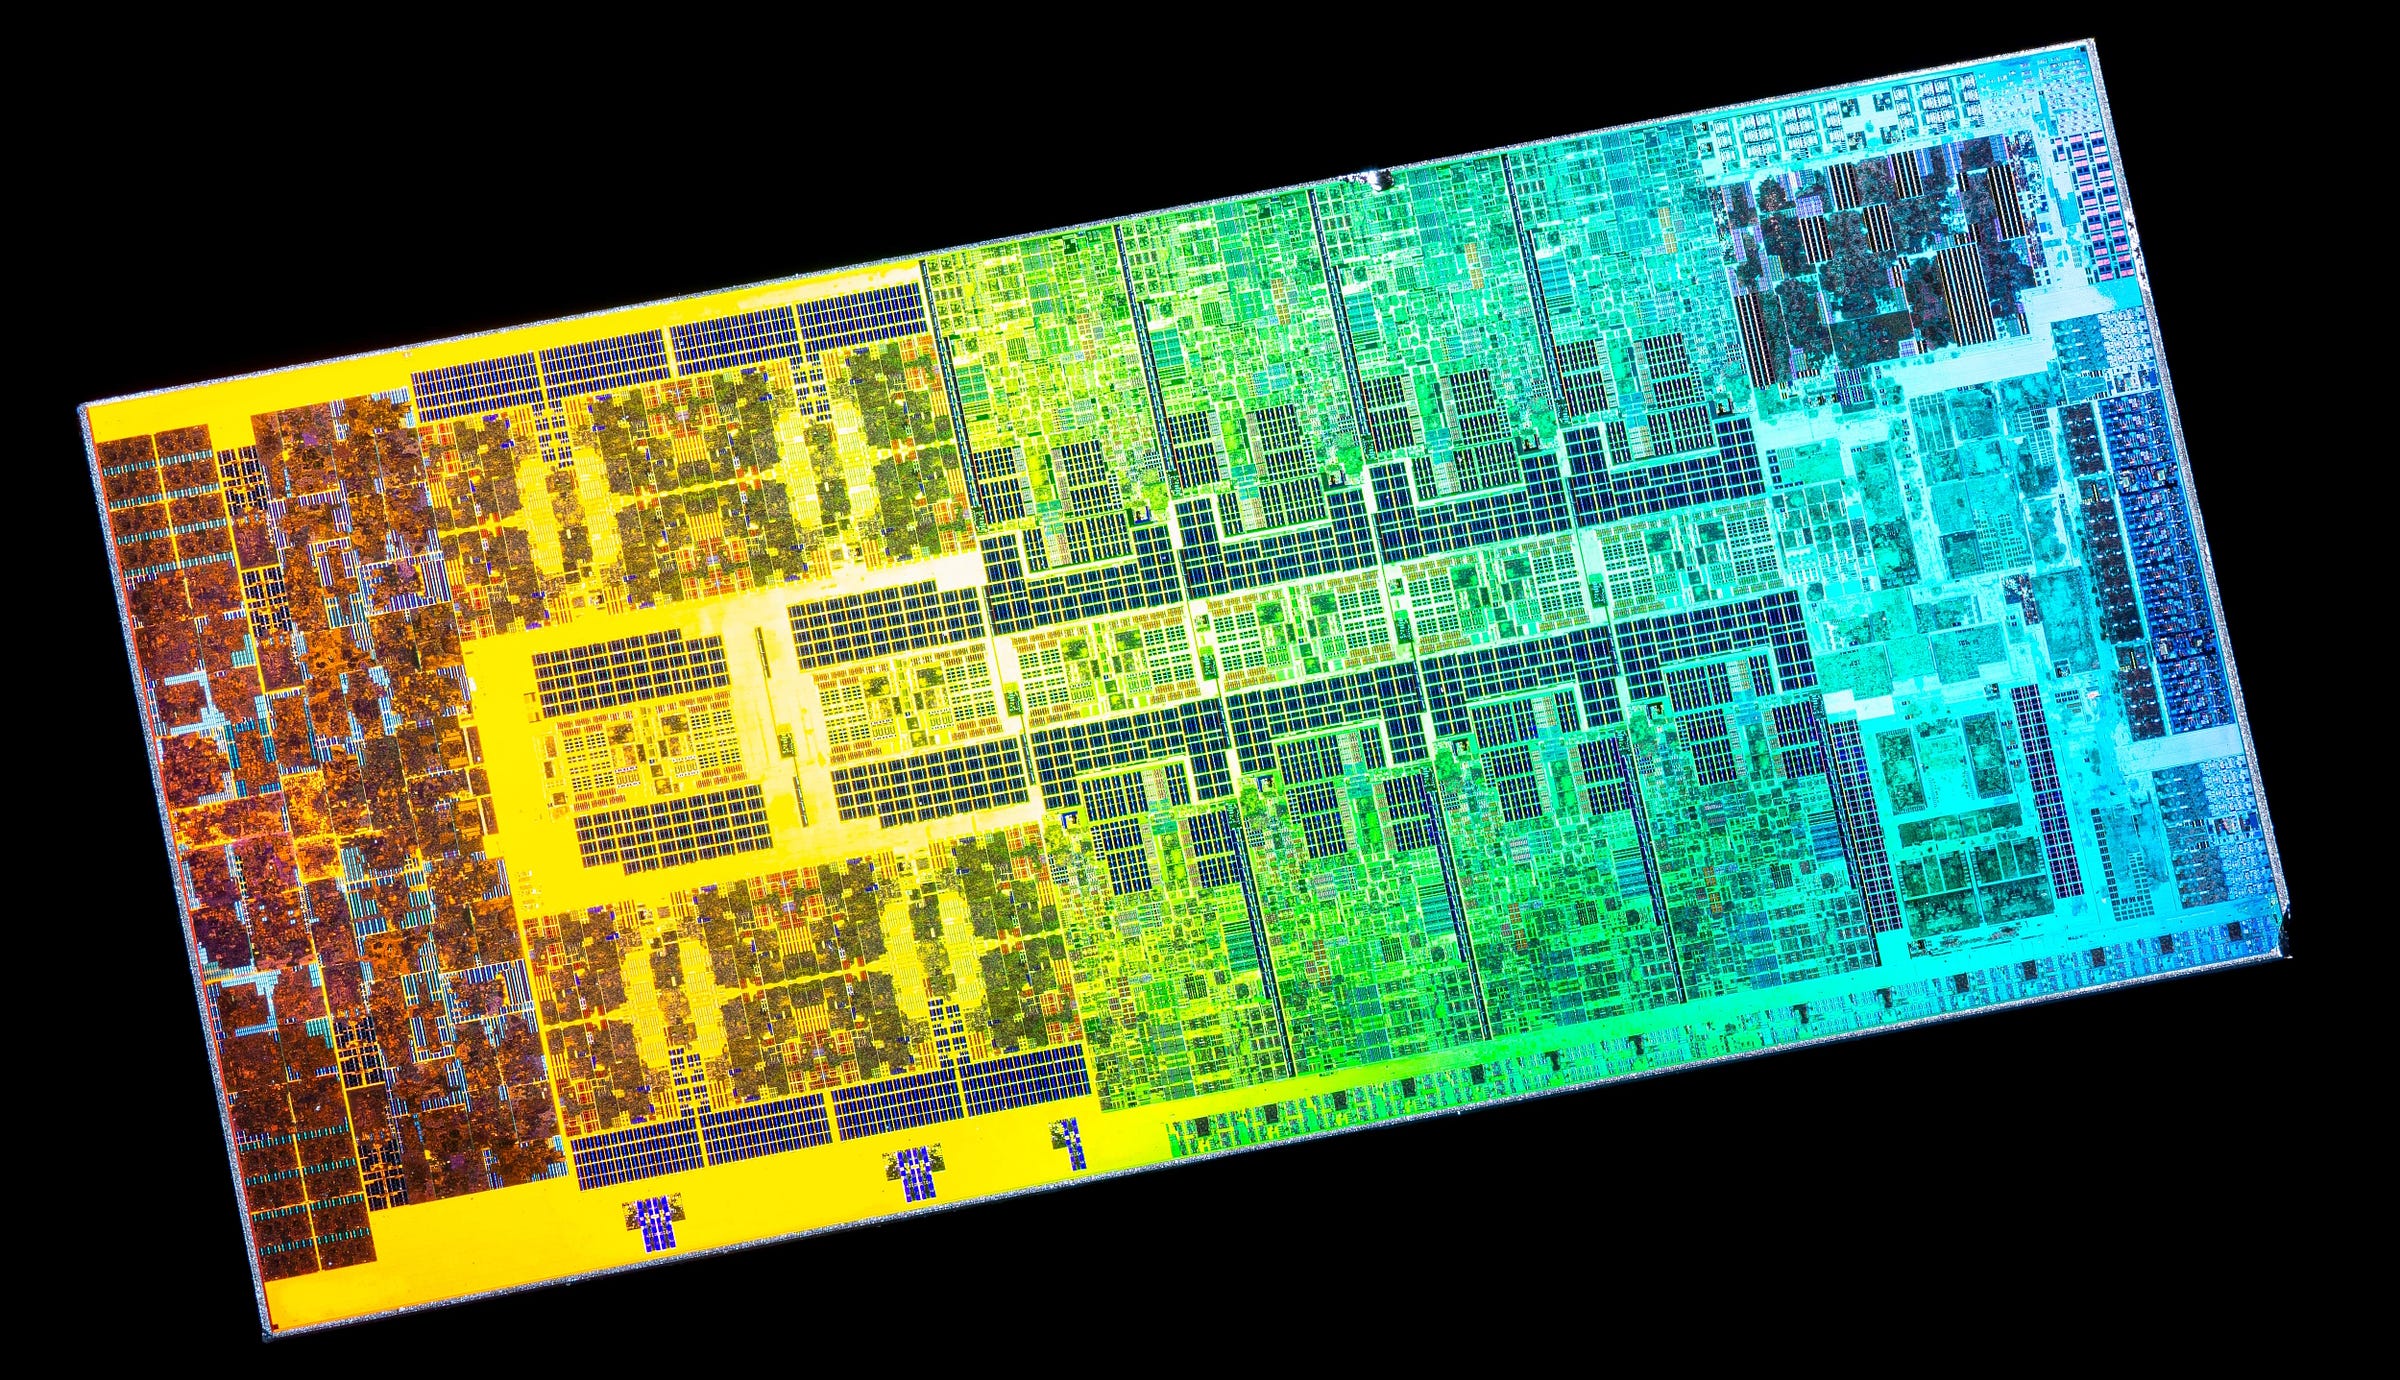 High resolution photo of an Intel CPU where there are many dark rectangles visible which are mostly SRAM blocks used in the design.